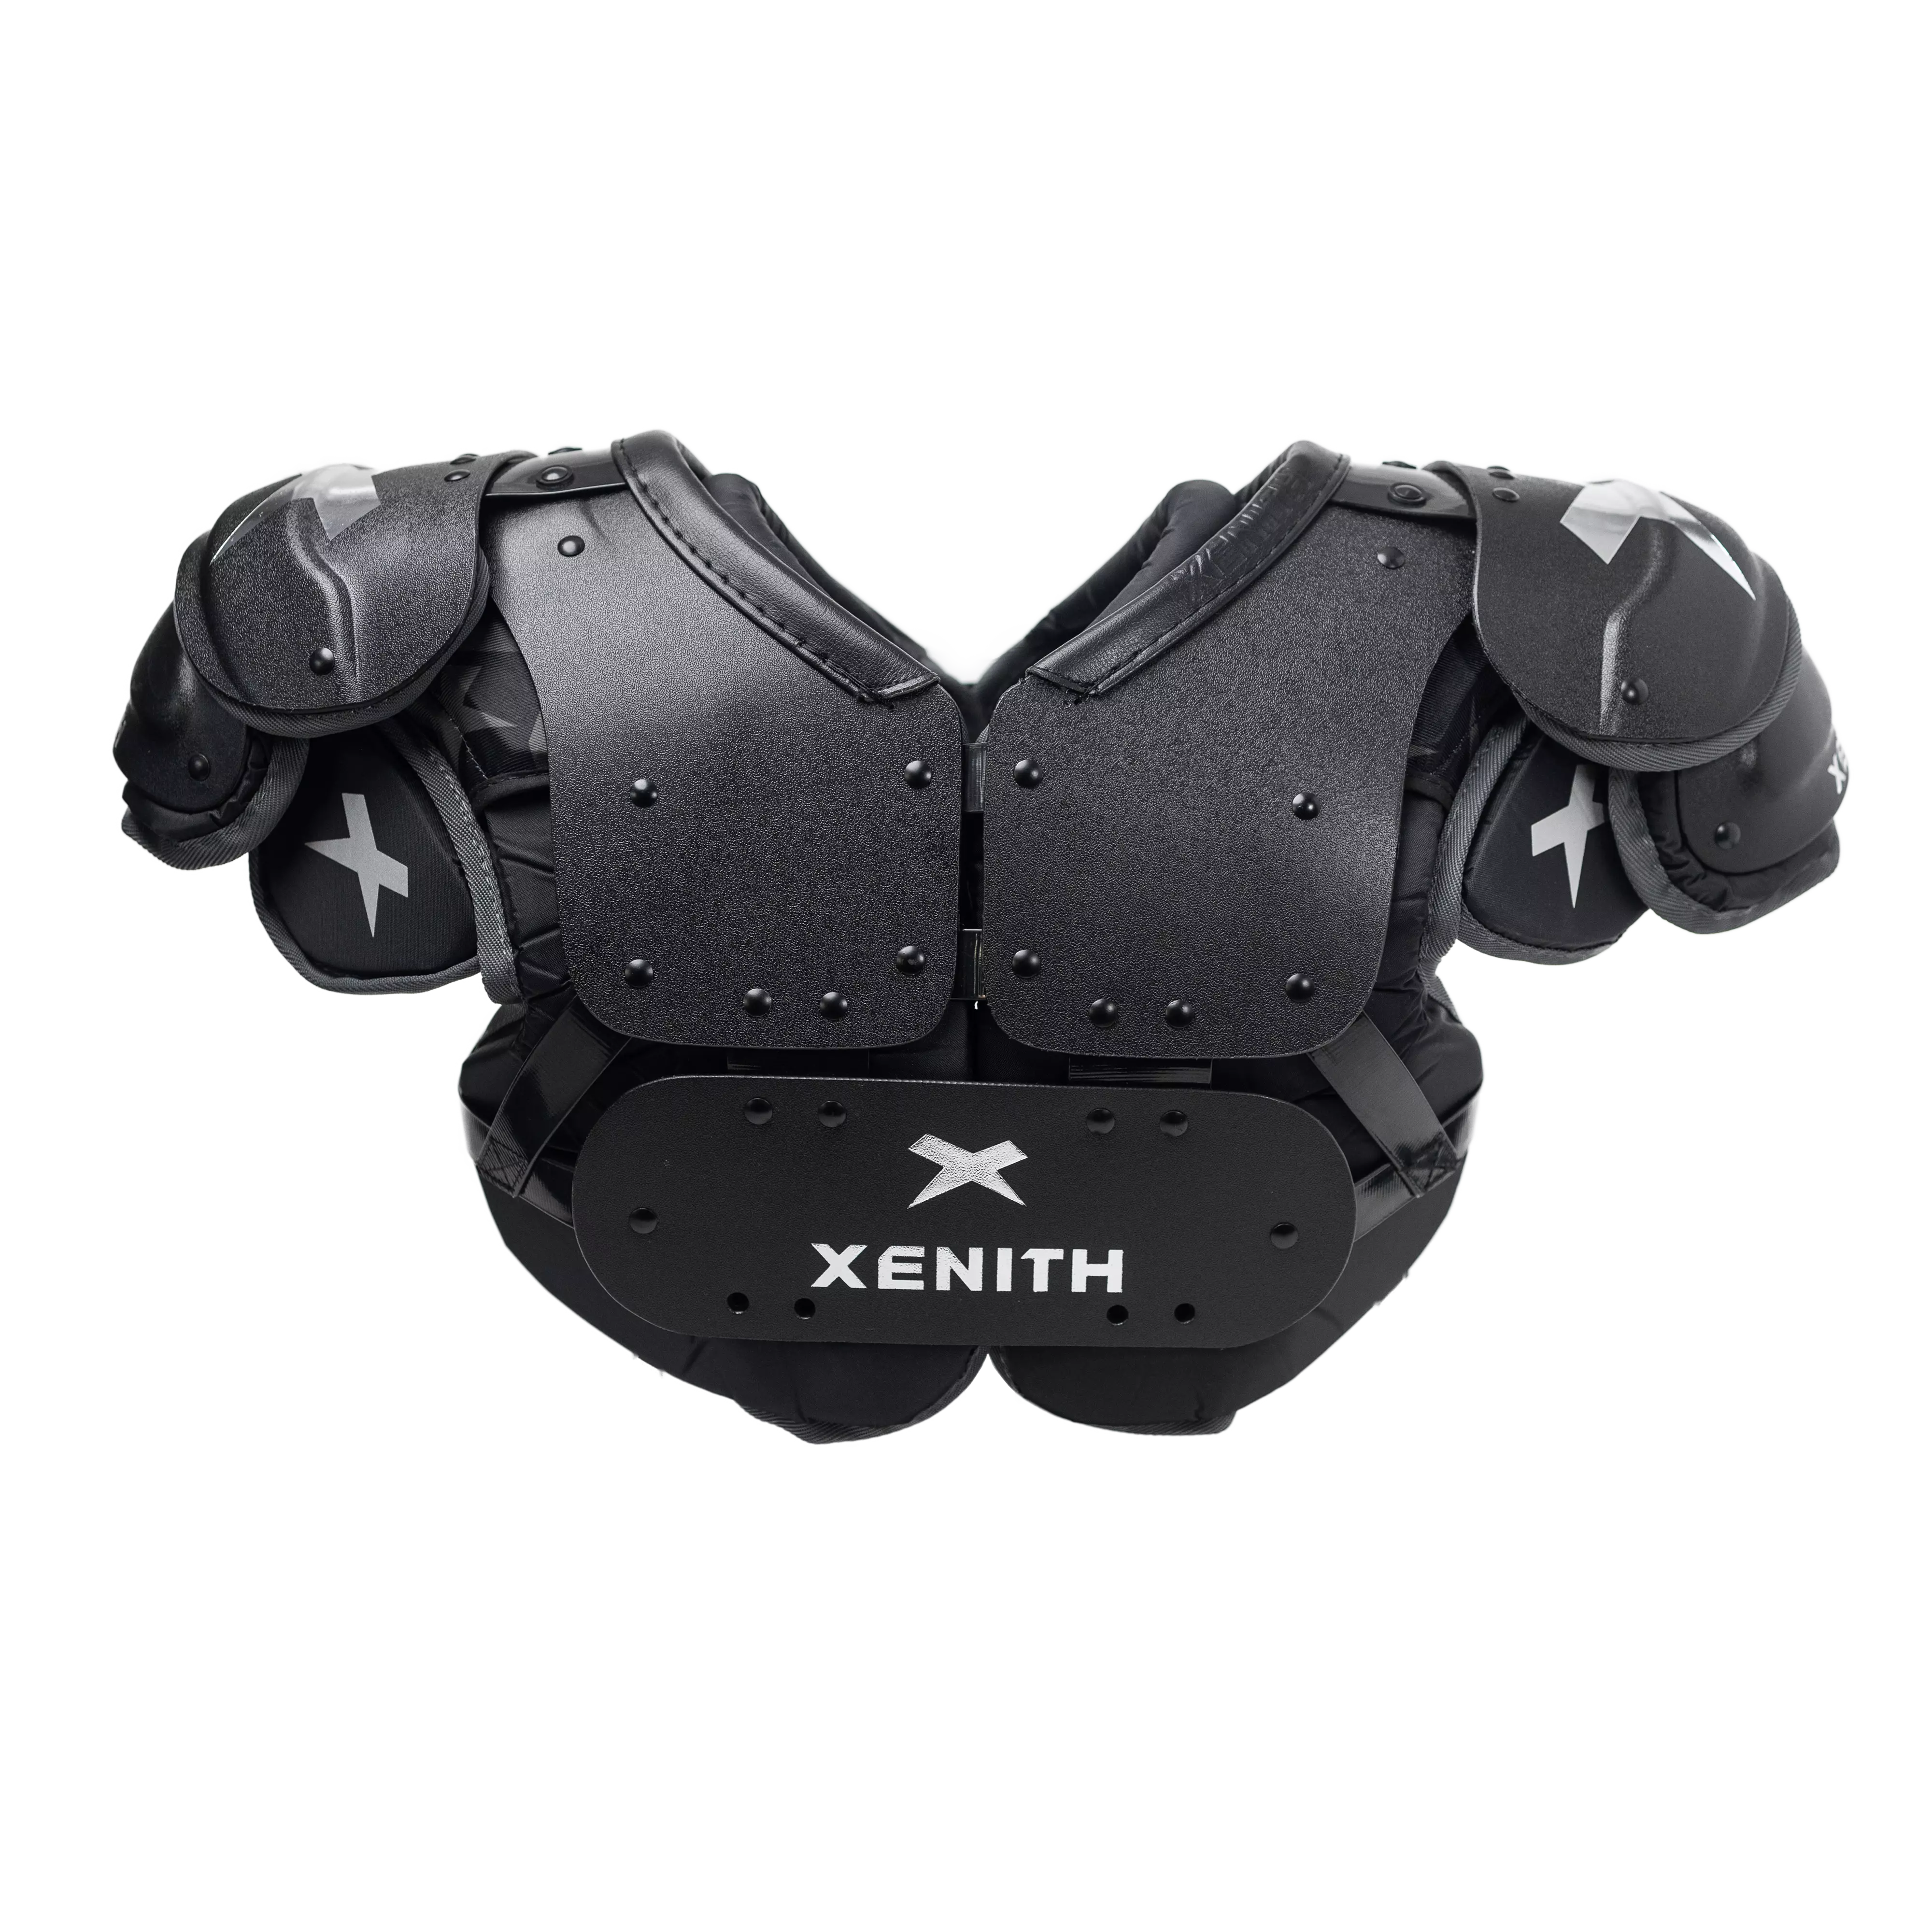 Backside view of Xenith Pro Skill shoulder pads.